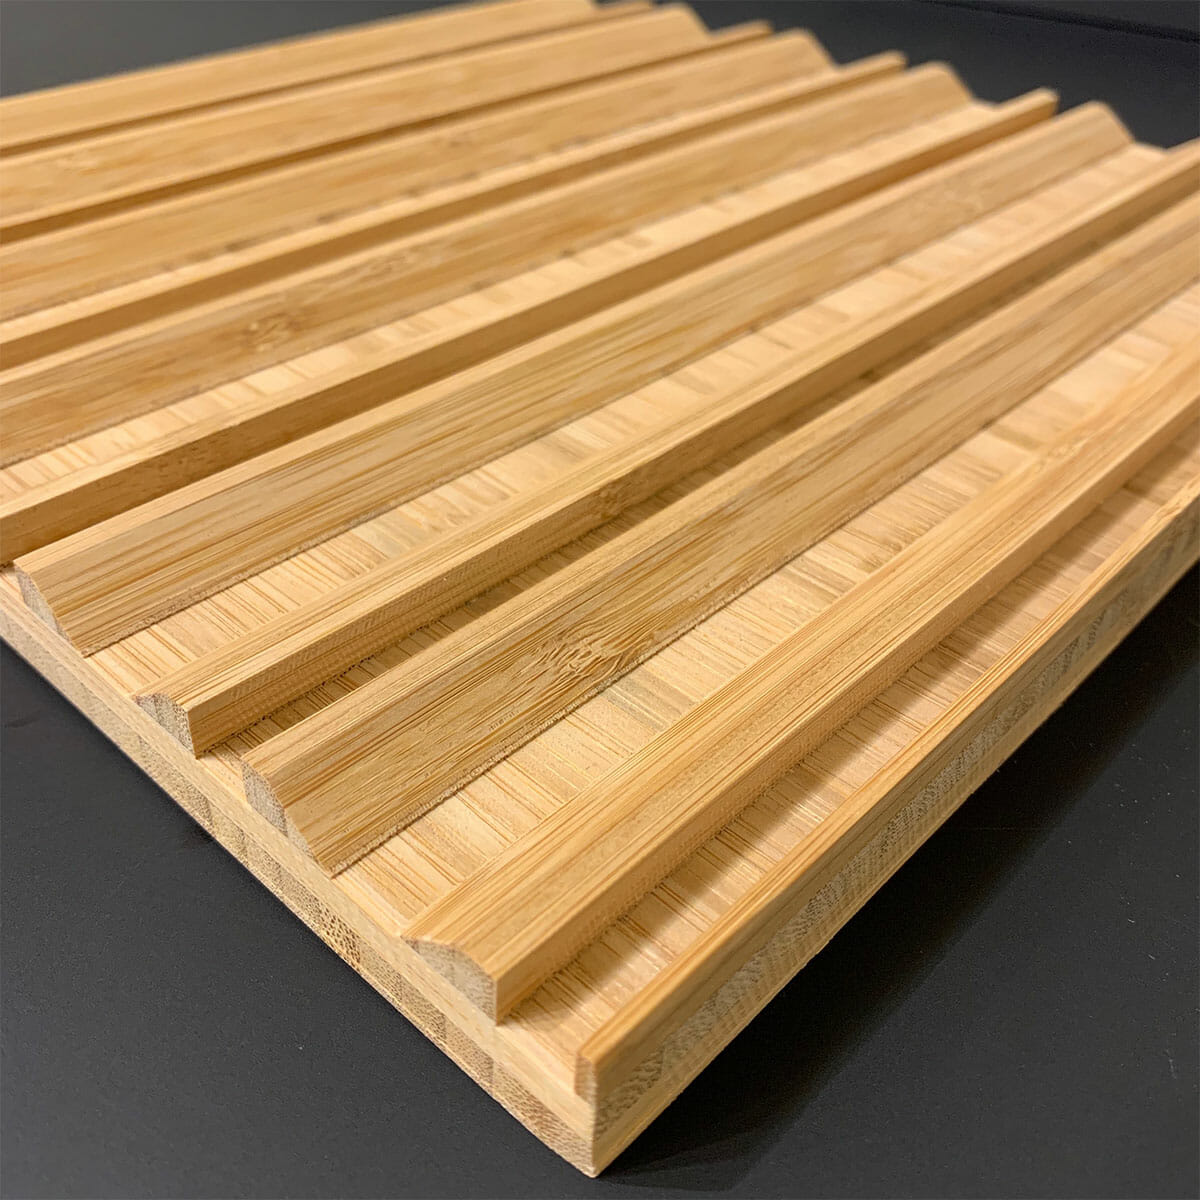 Bamboo Dimensional Lumber - Plyboo by Smith & Fong